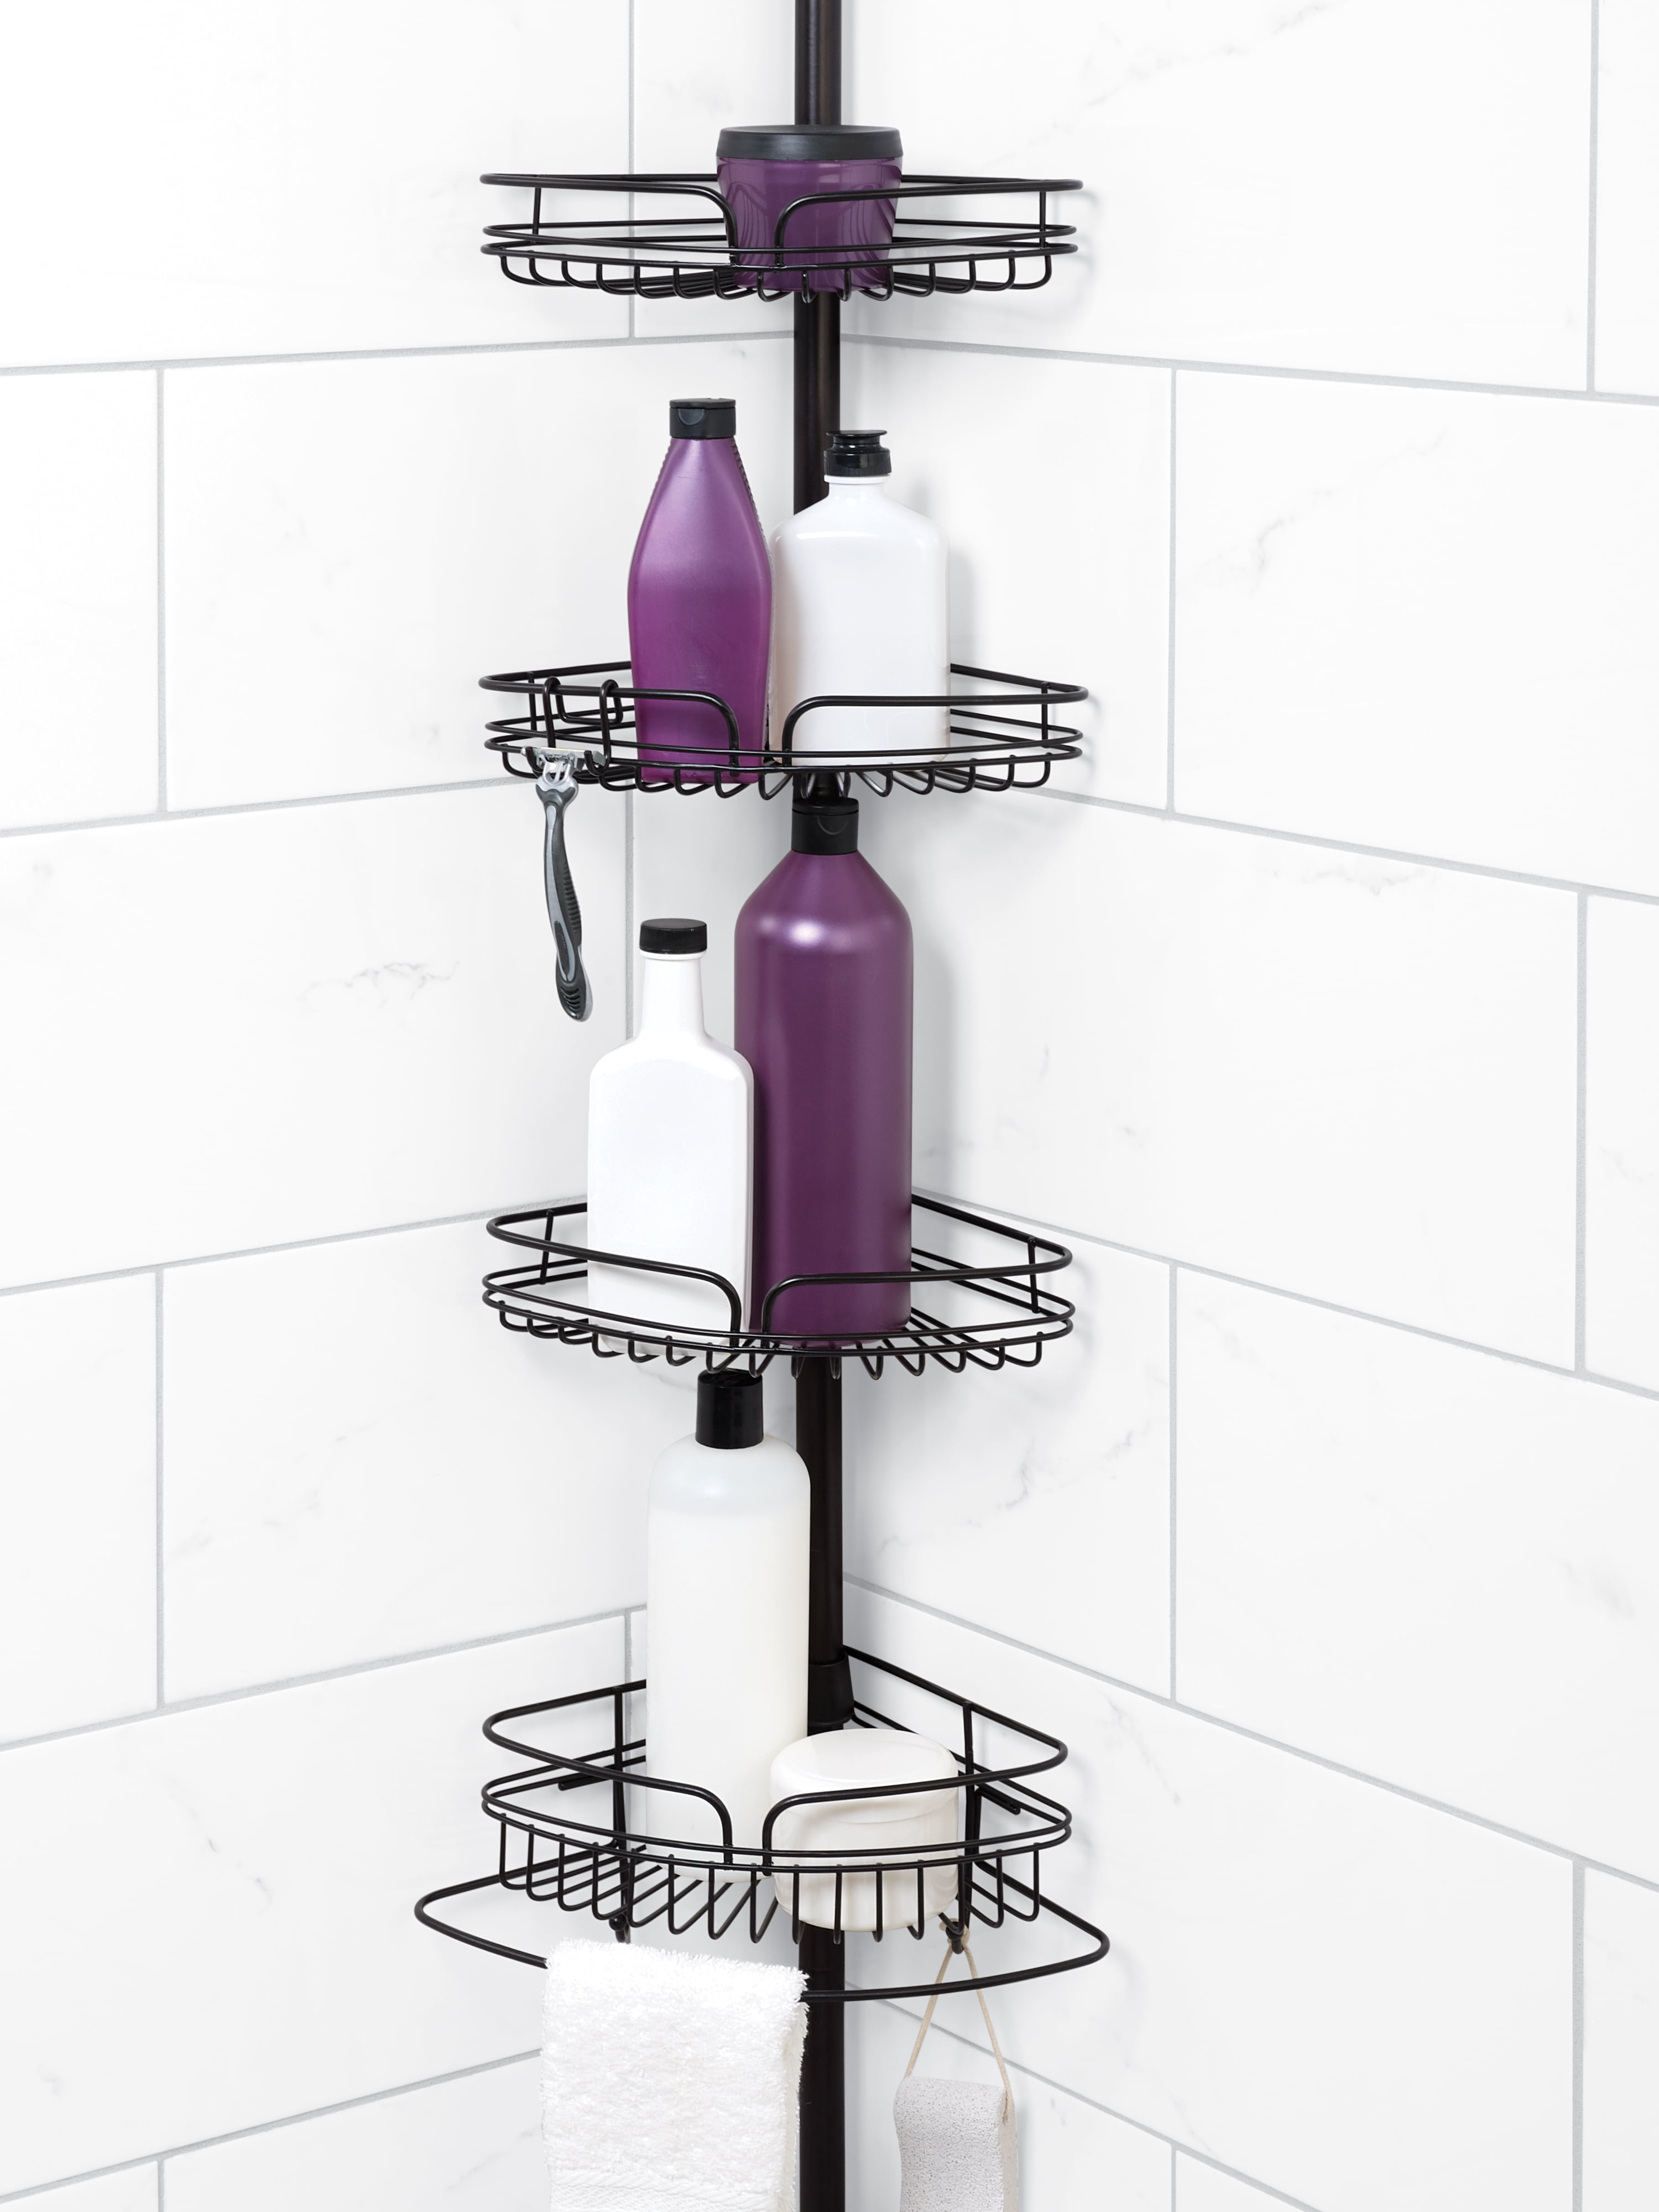 Details about   Zenna Home Shower Tension Pole Caddy Oil Rubbed Bronze 